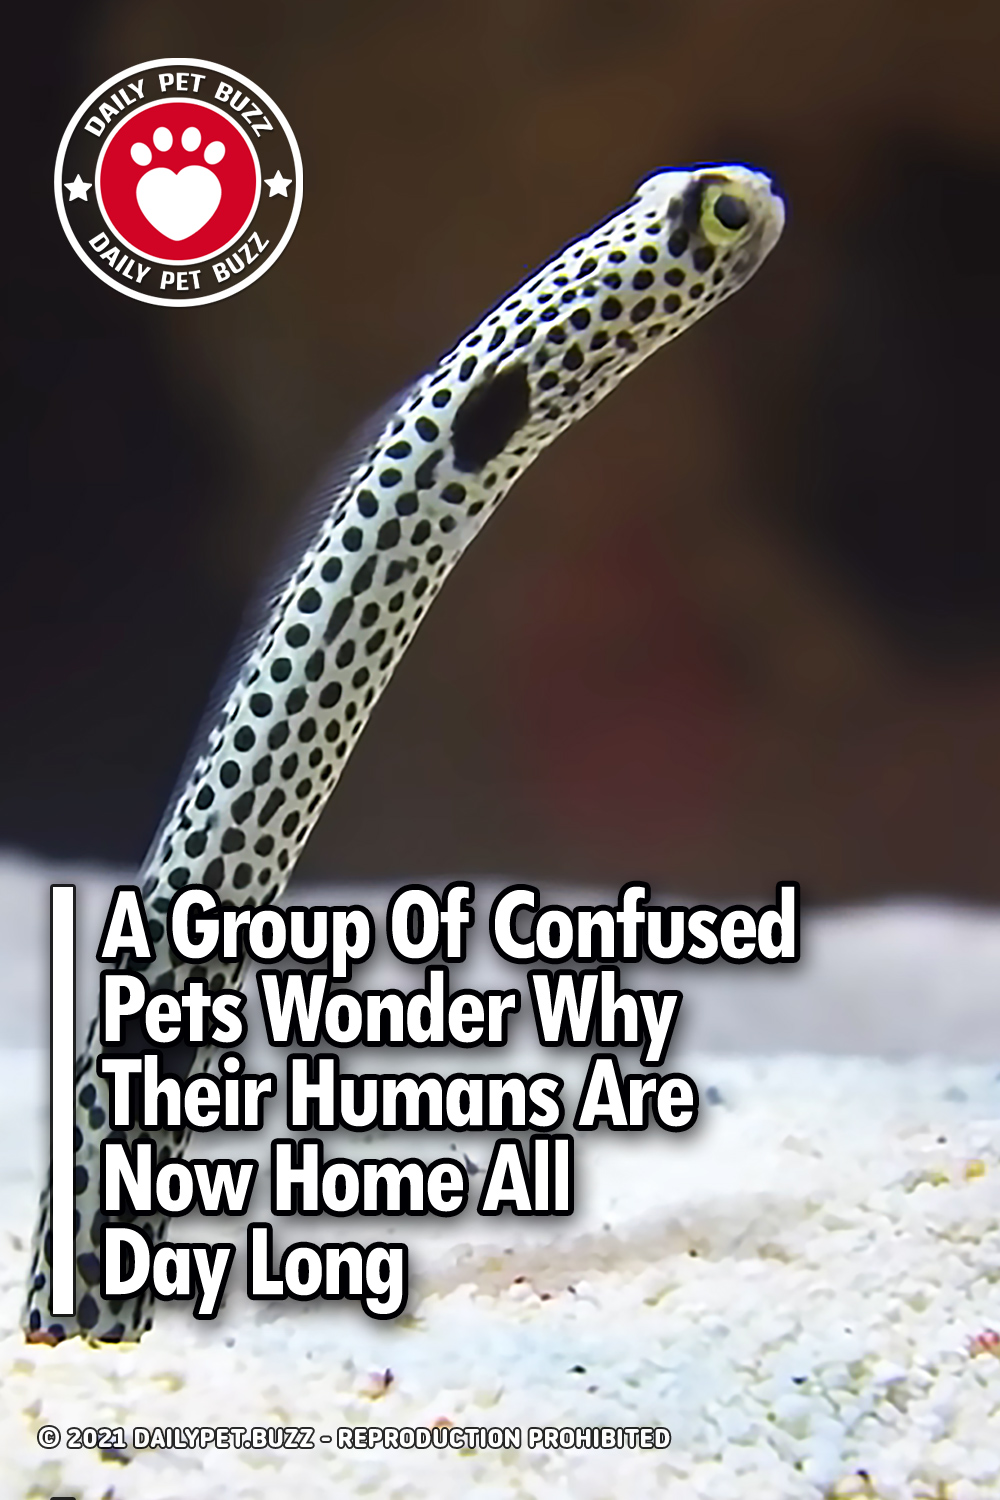 A Group Of Confused Pets Wonder Why Their Humans Are Now Home All Day Long